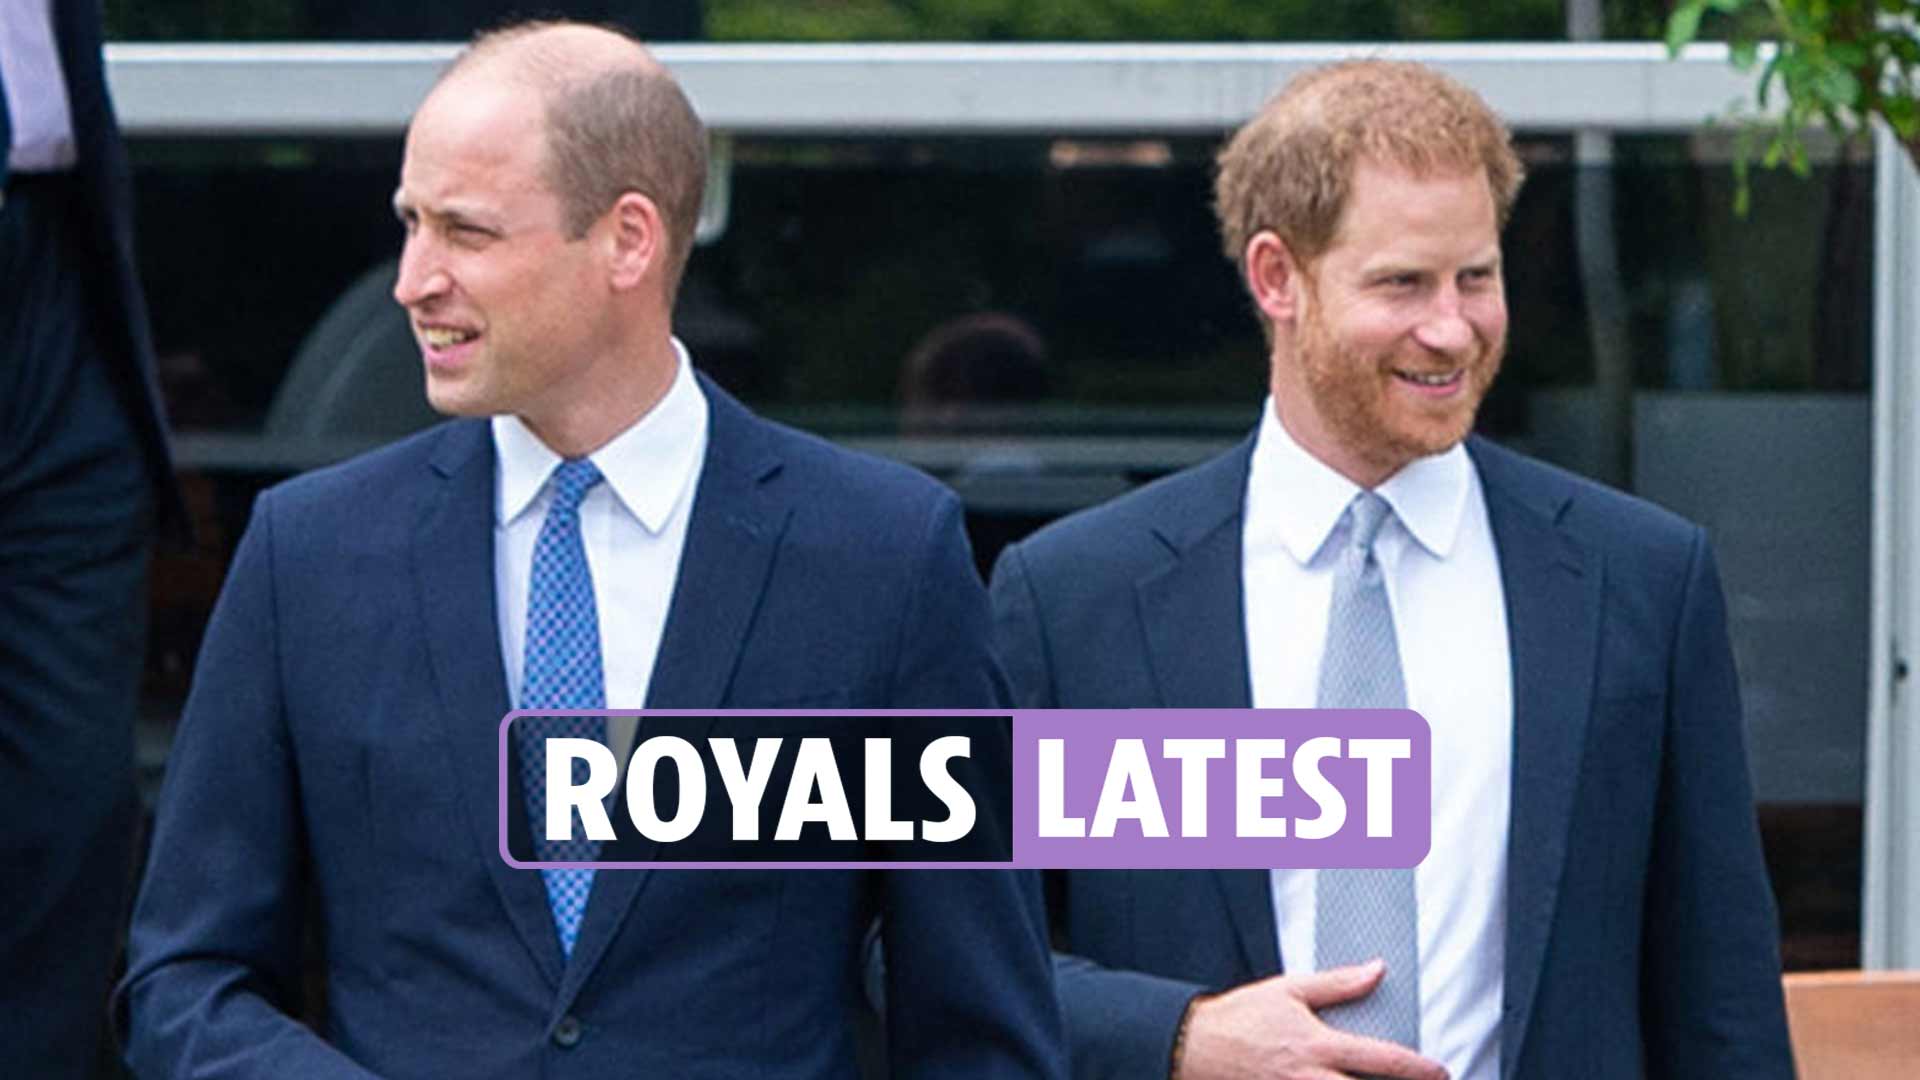 Prince William thought Harry had 'lost the plot' after 'nonsense' claims